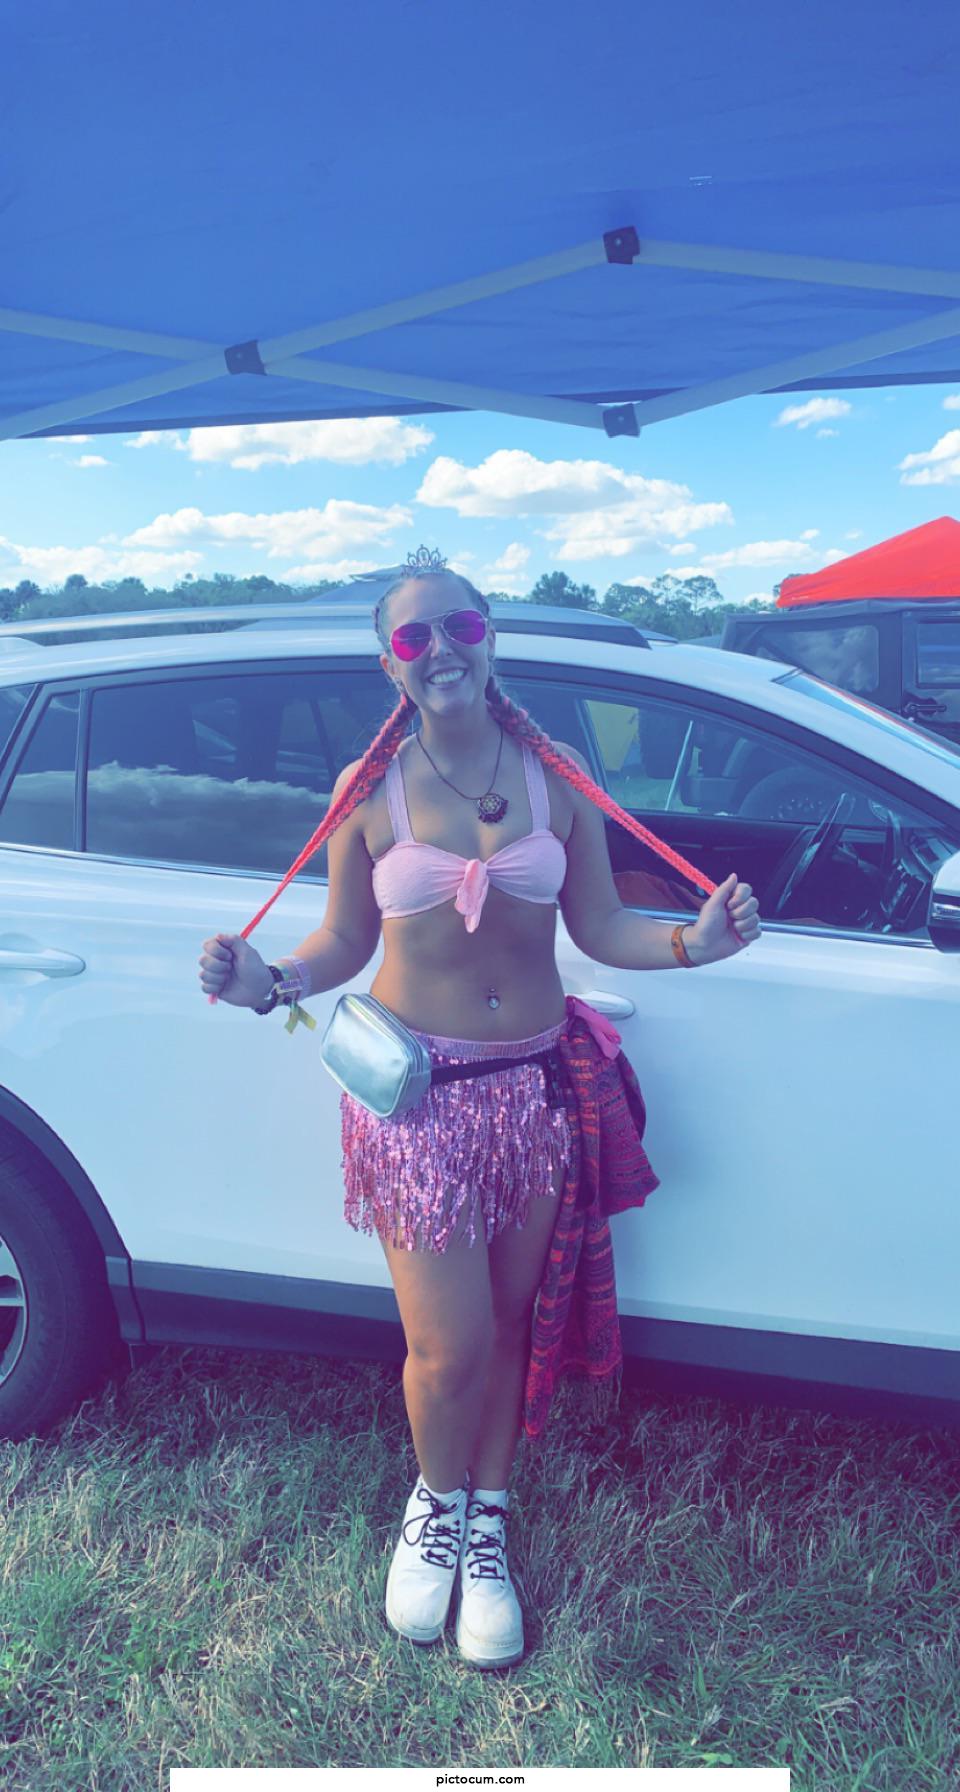 Who’s throwing ass with me at ubbi dubbi 🍑